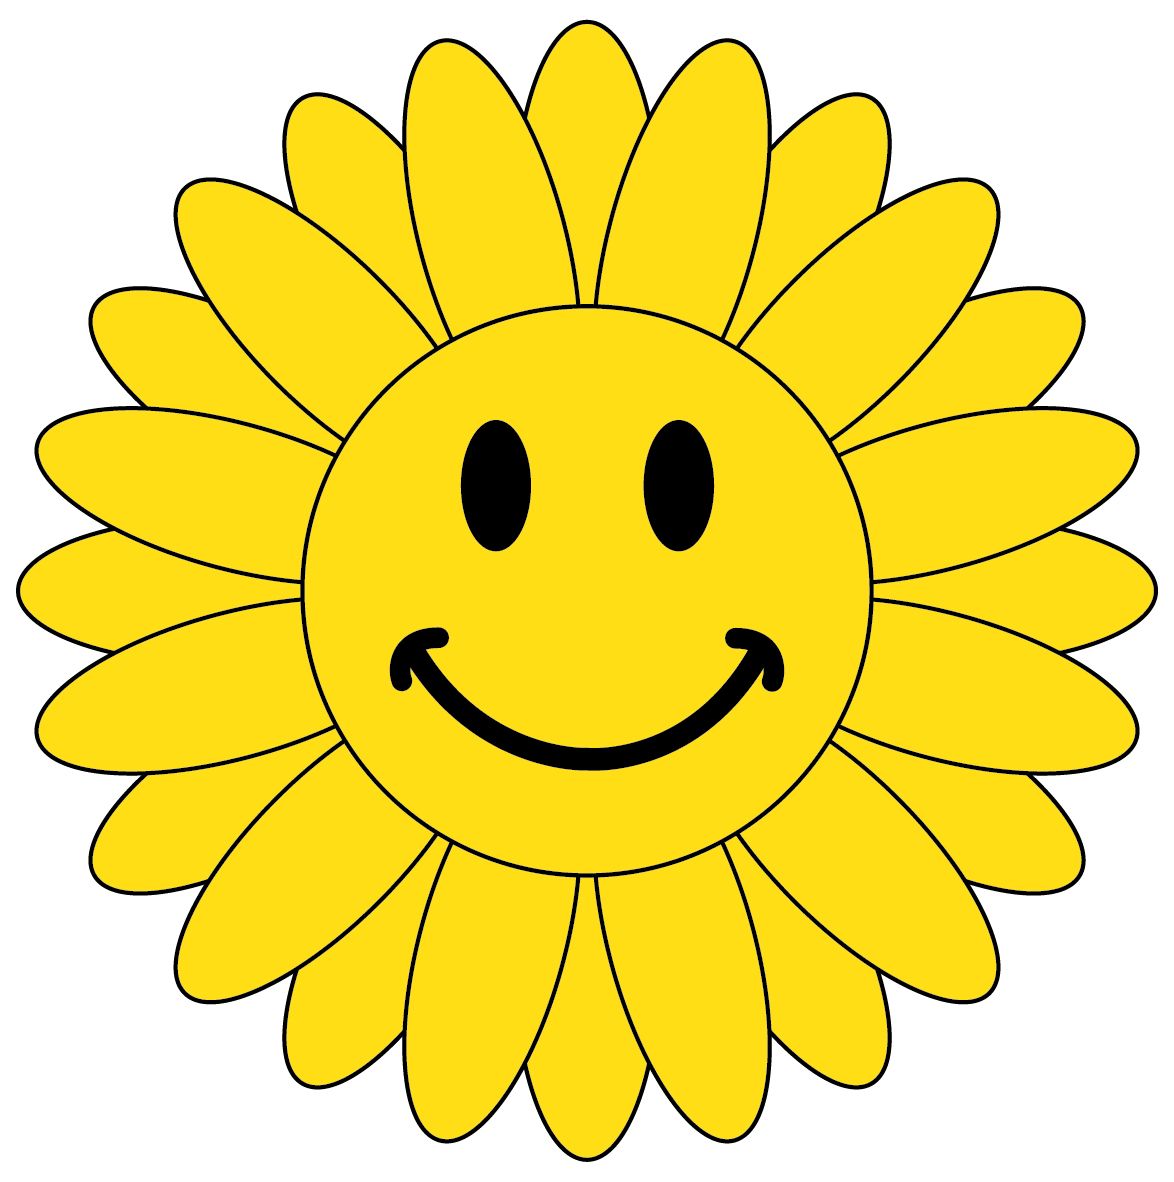 Moving Smiley Faces Clip Art